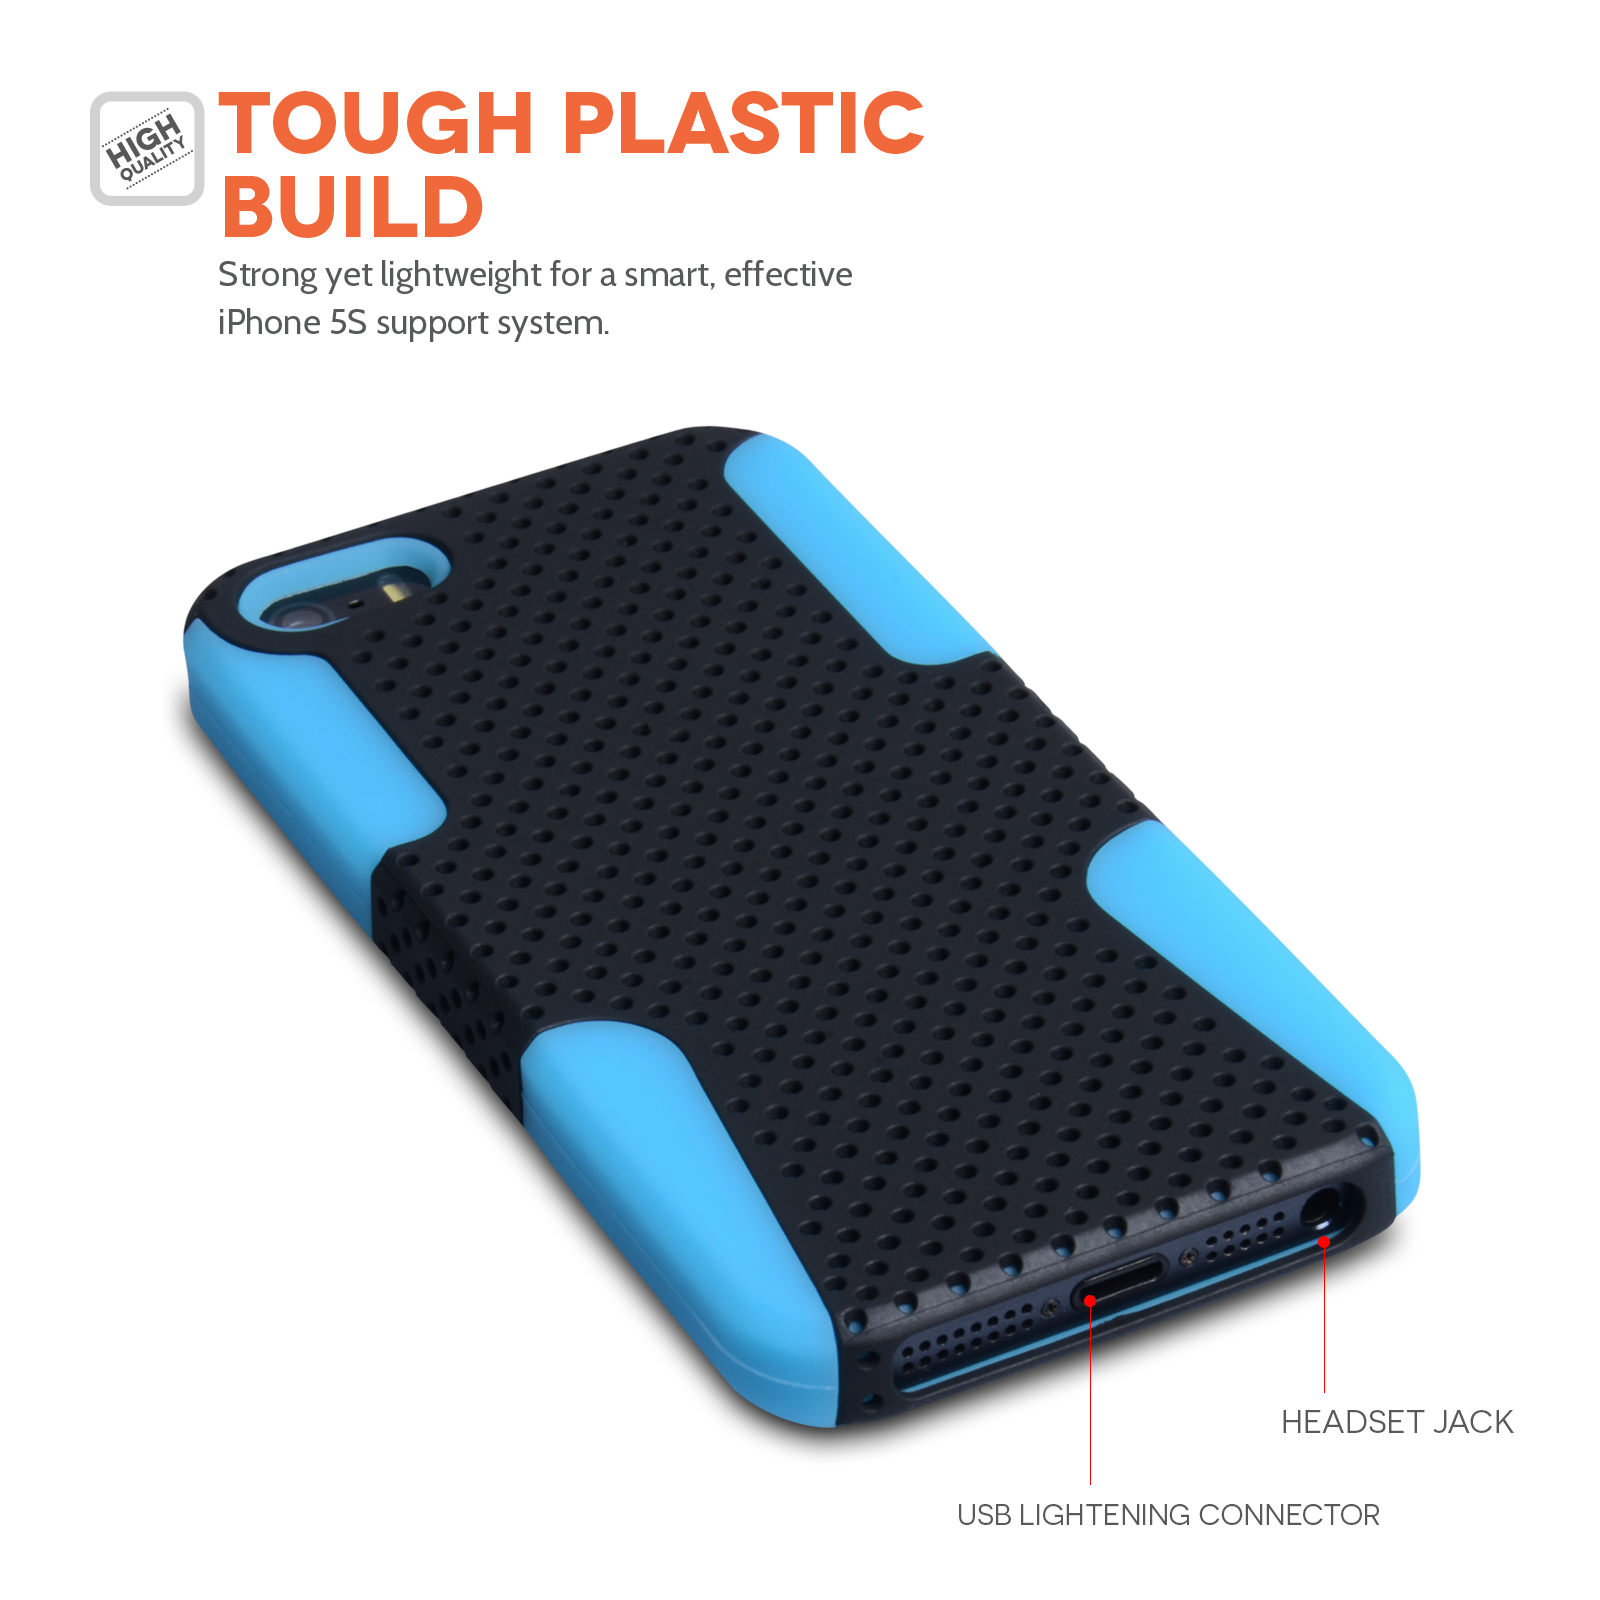 YouSave Accessories iPhone 5 / 5S Mesh Combo Case - Blue 